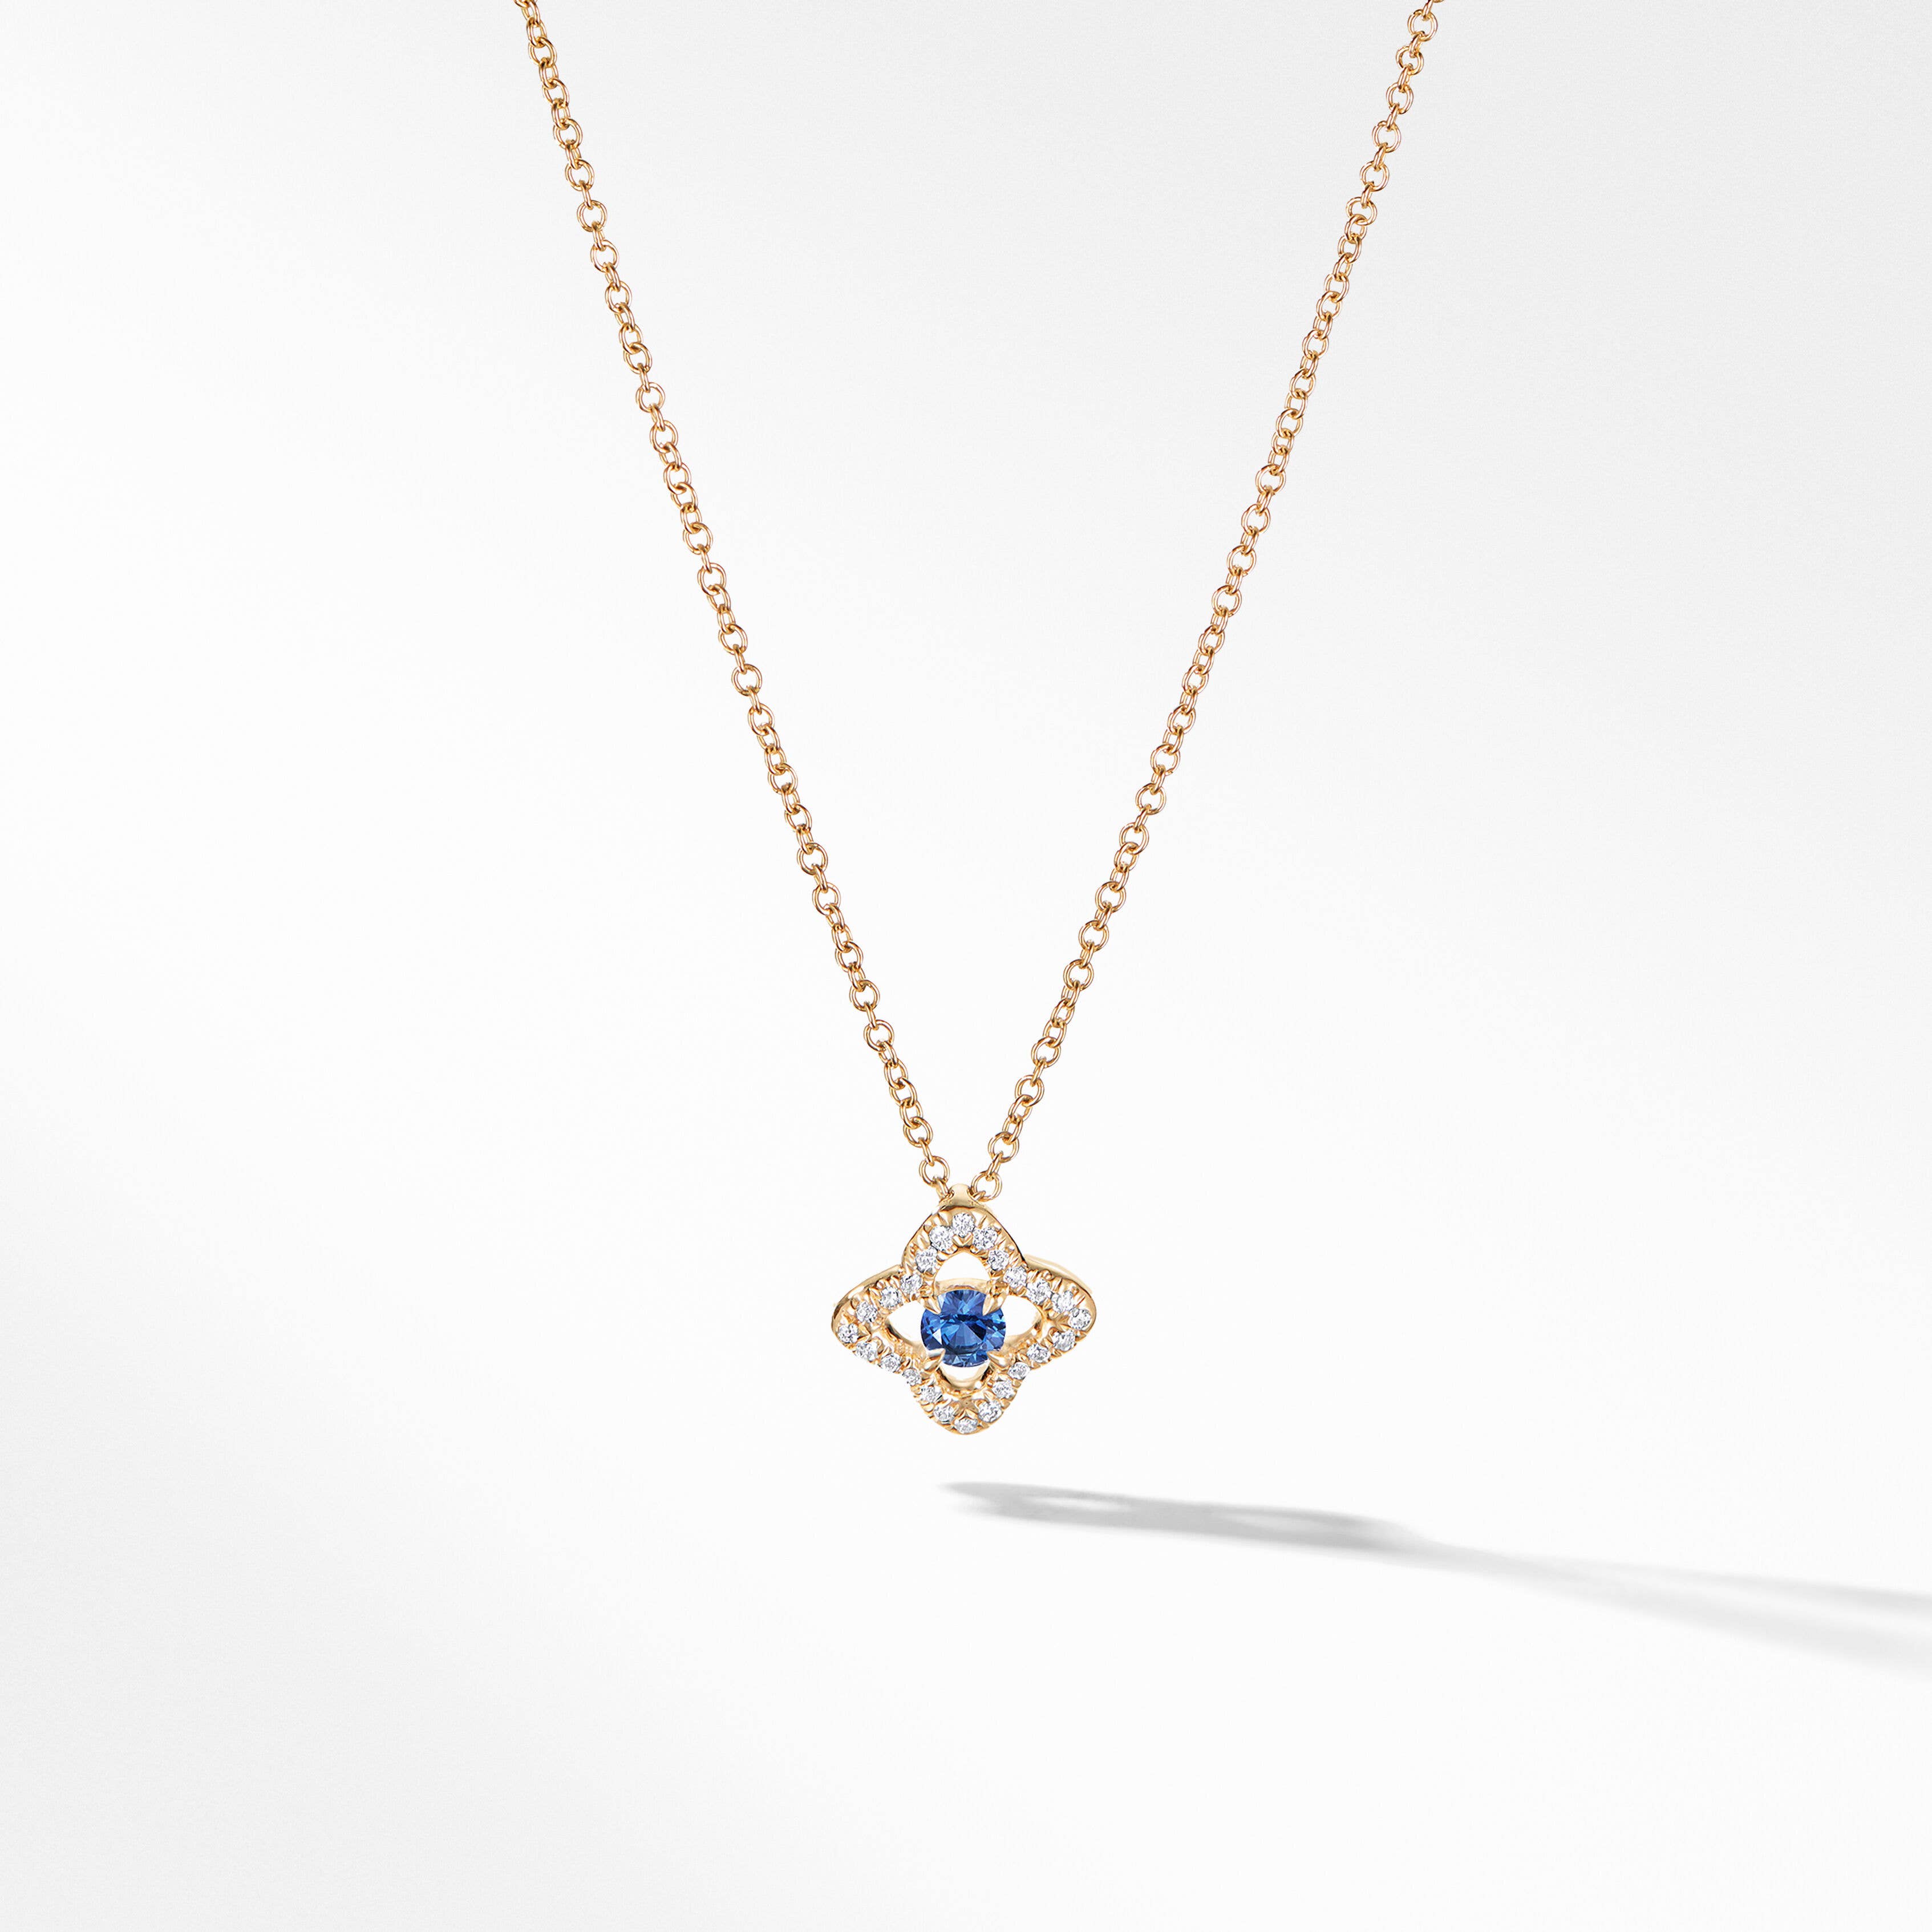 Venetian Quatrefoil® Necklace in 18K Yellow Gold with Blue Sapphire and Pavé Diamonds